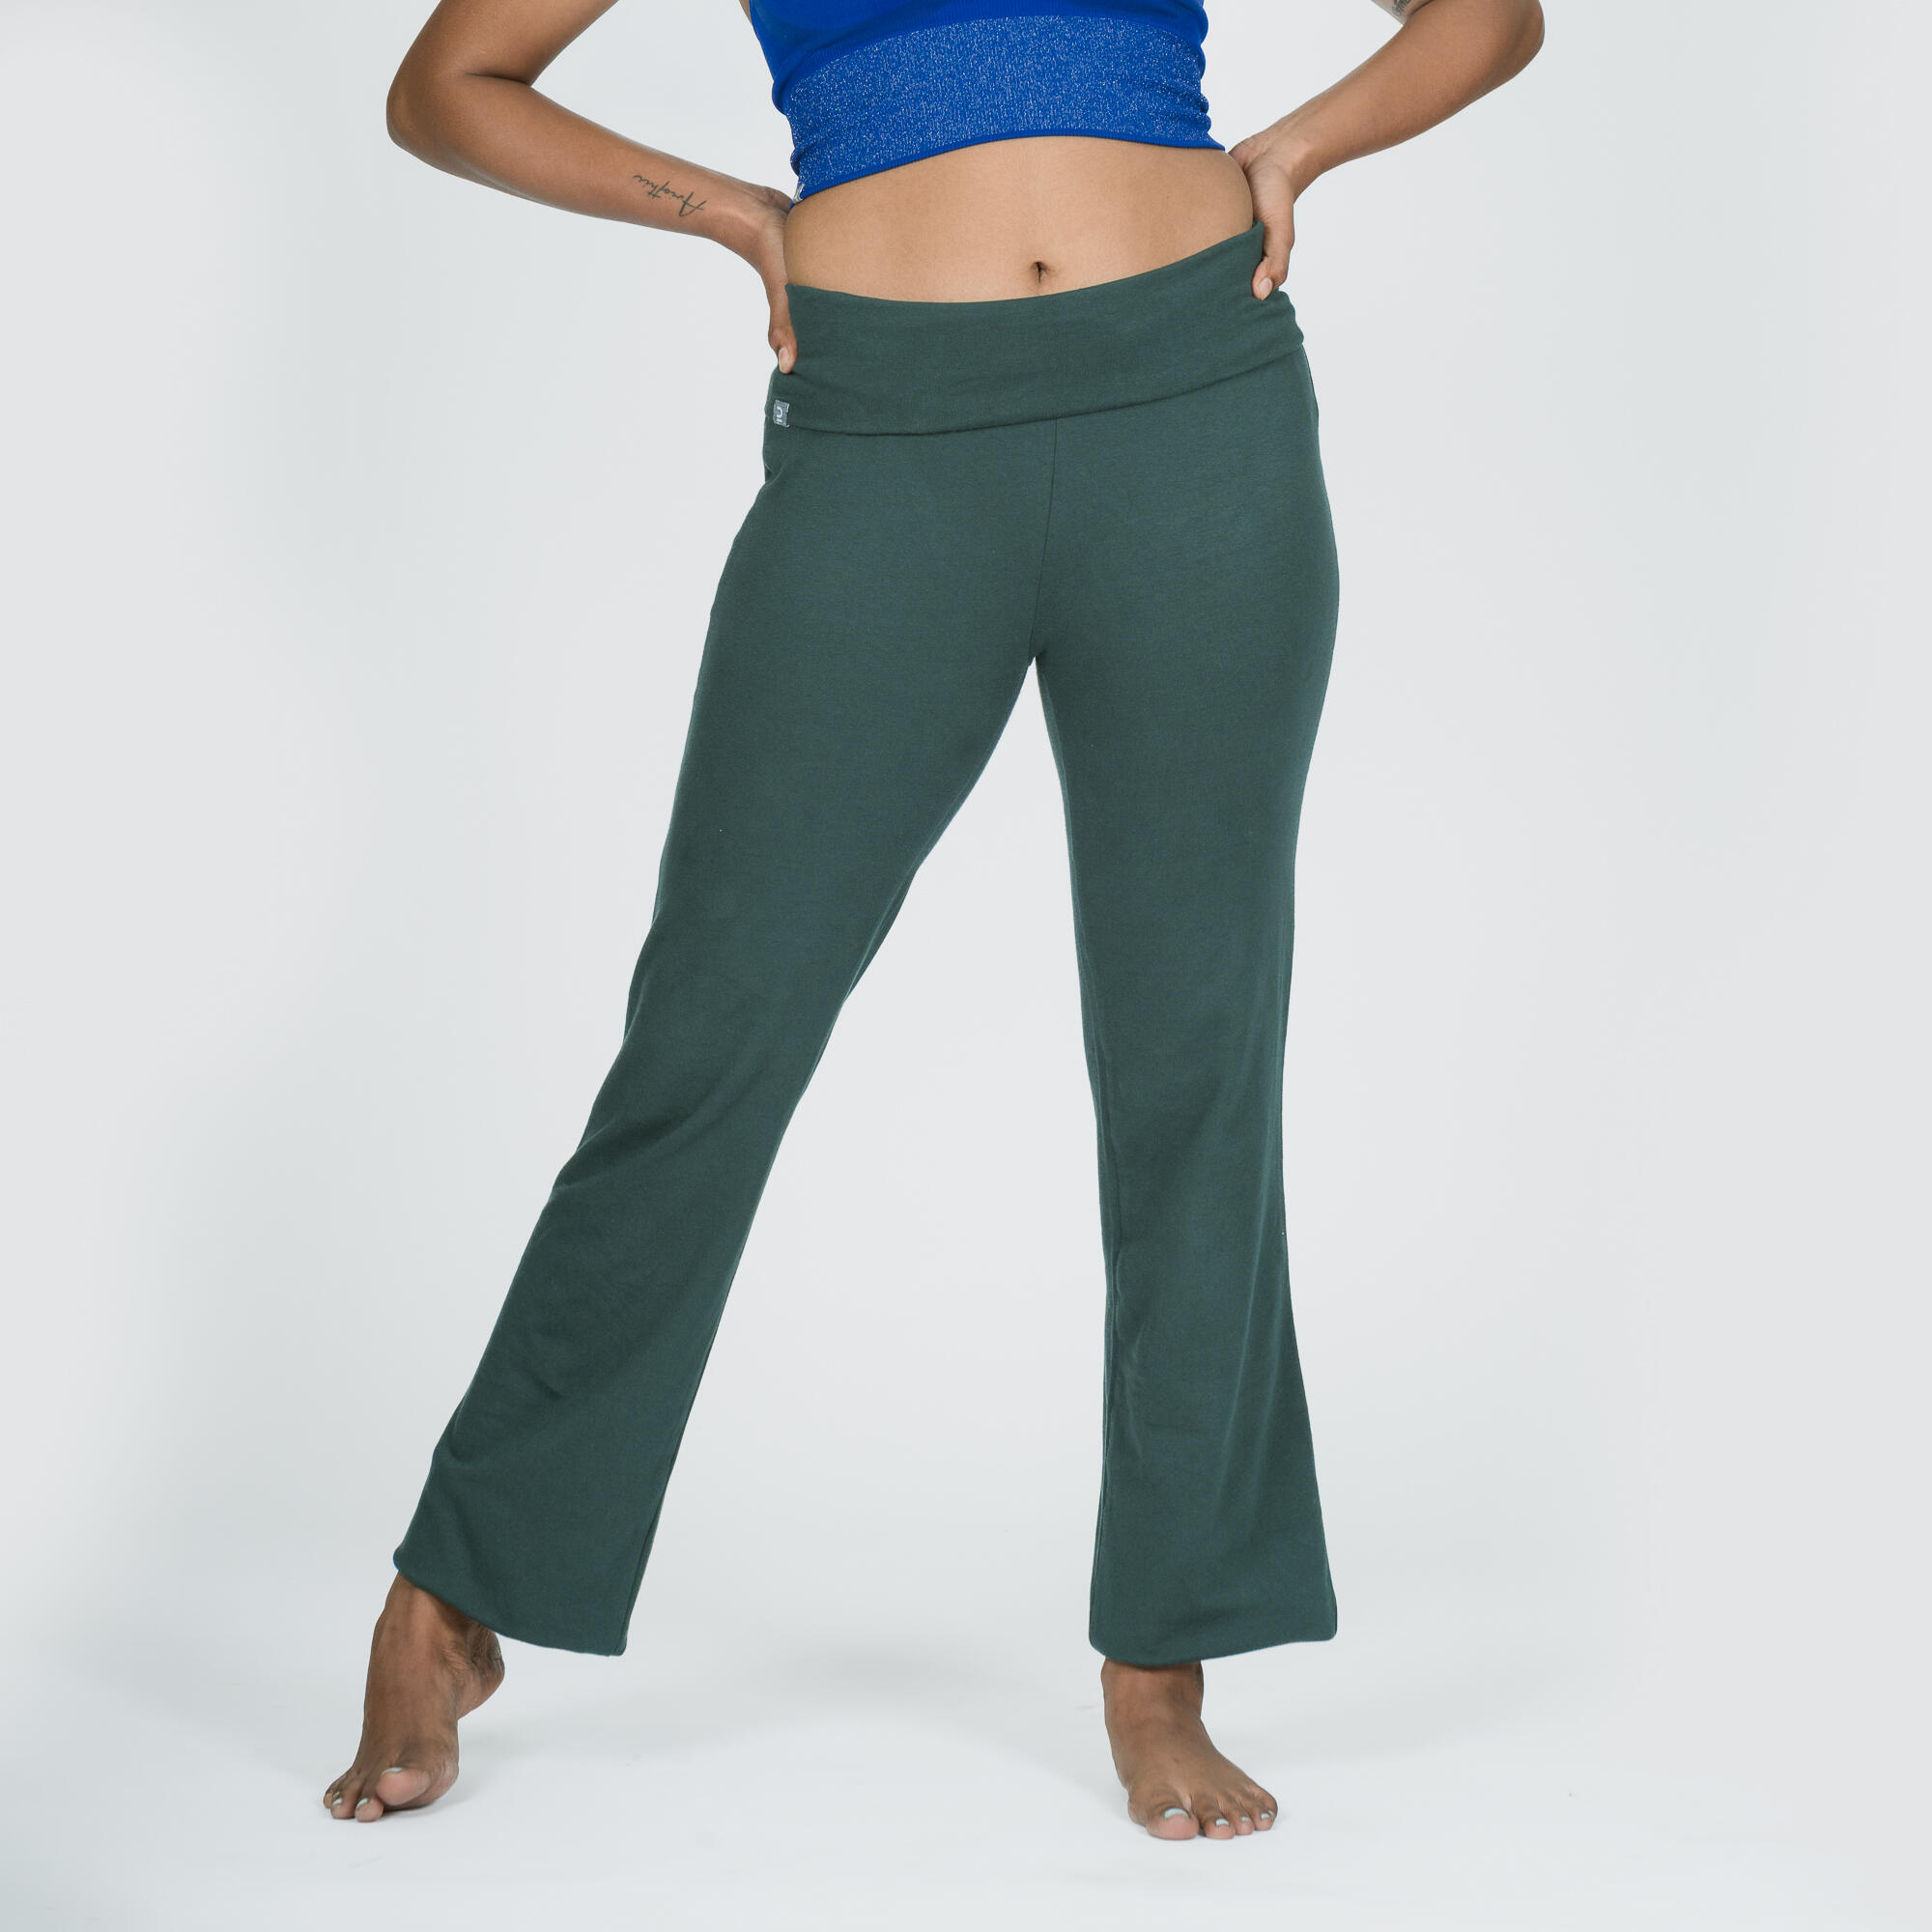 Yoga fashion made from GOTS-certified organic cotton – Page 6